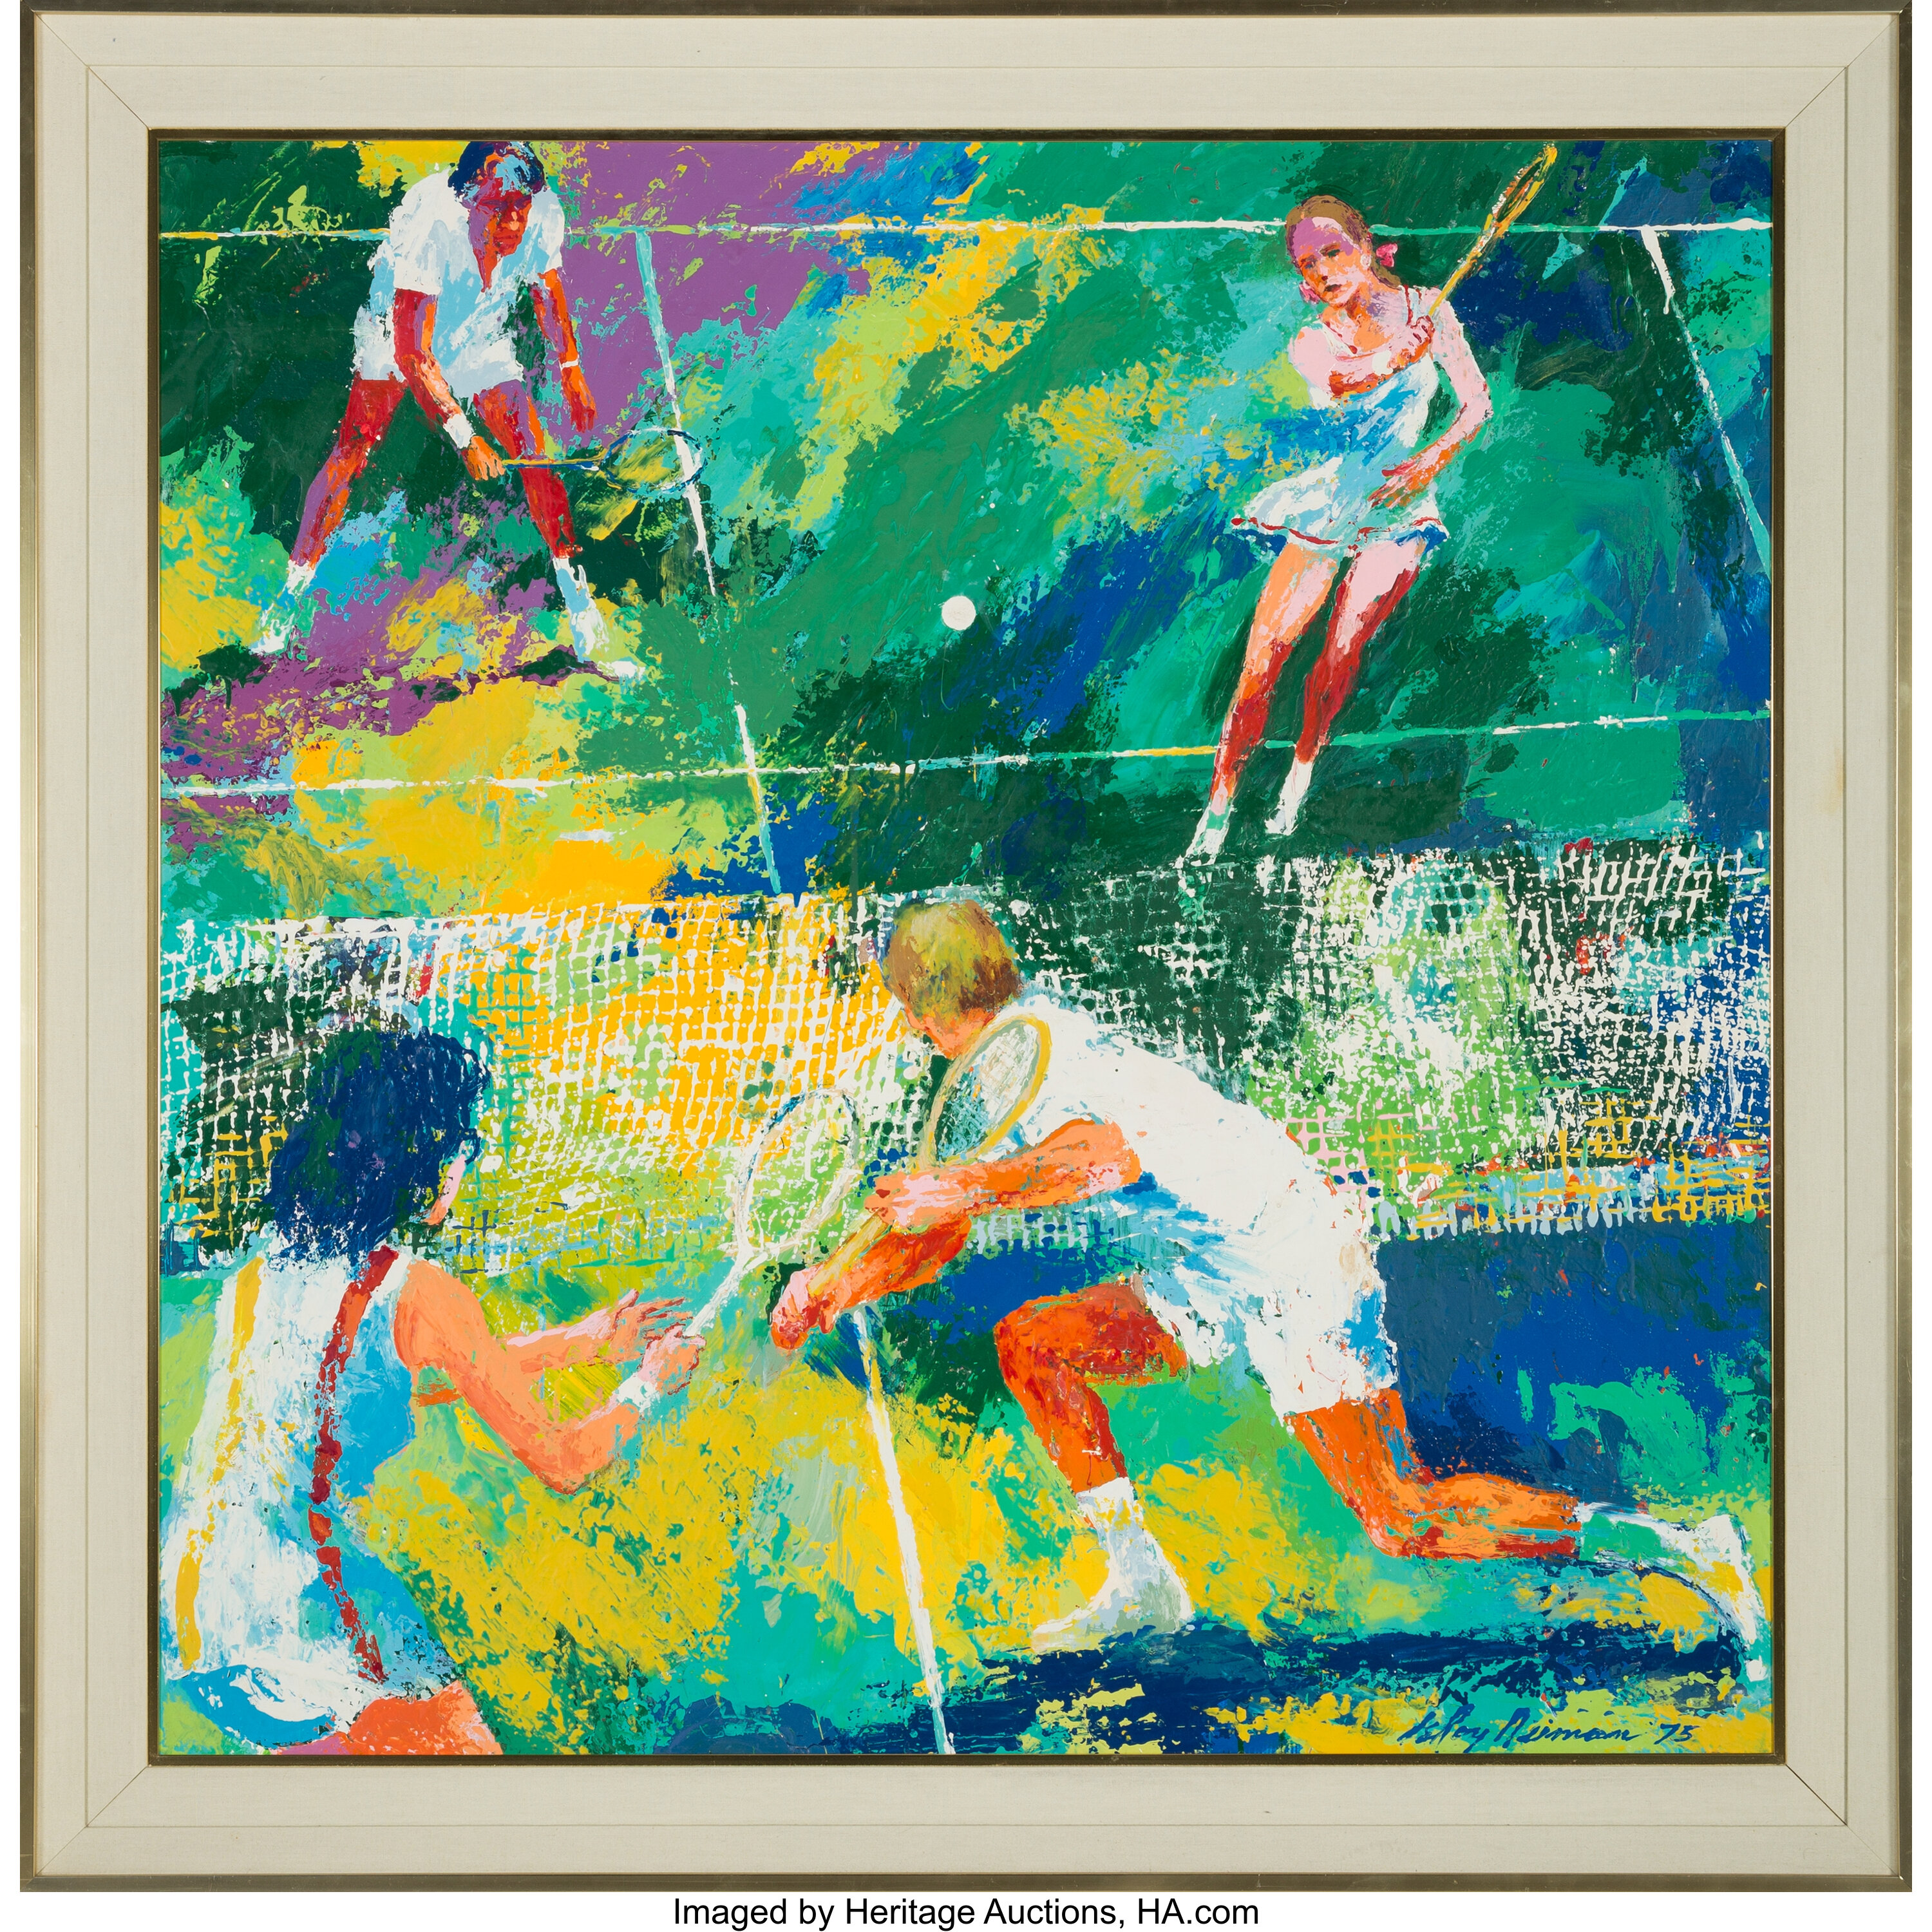 1975 "Mixed Doubles" Original Oil on Board Painting by